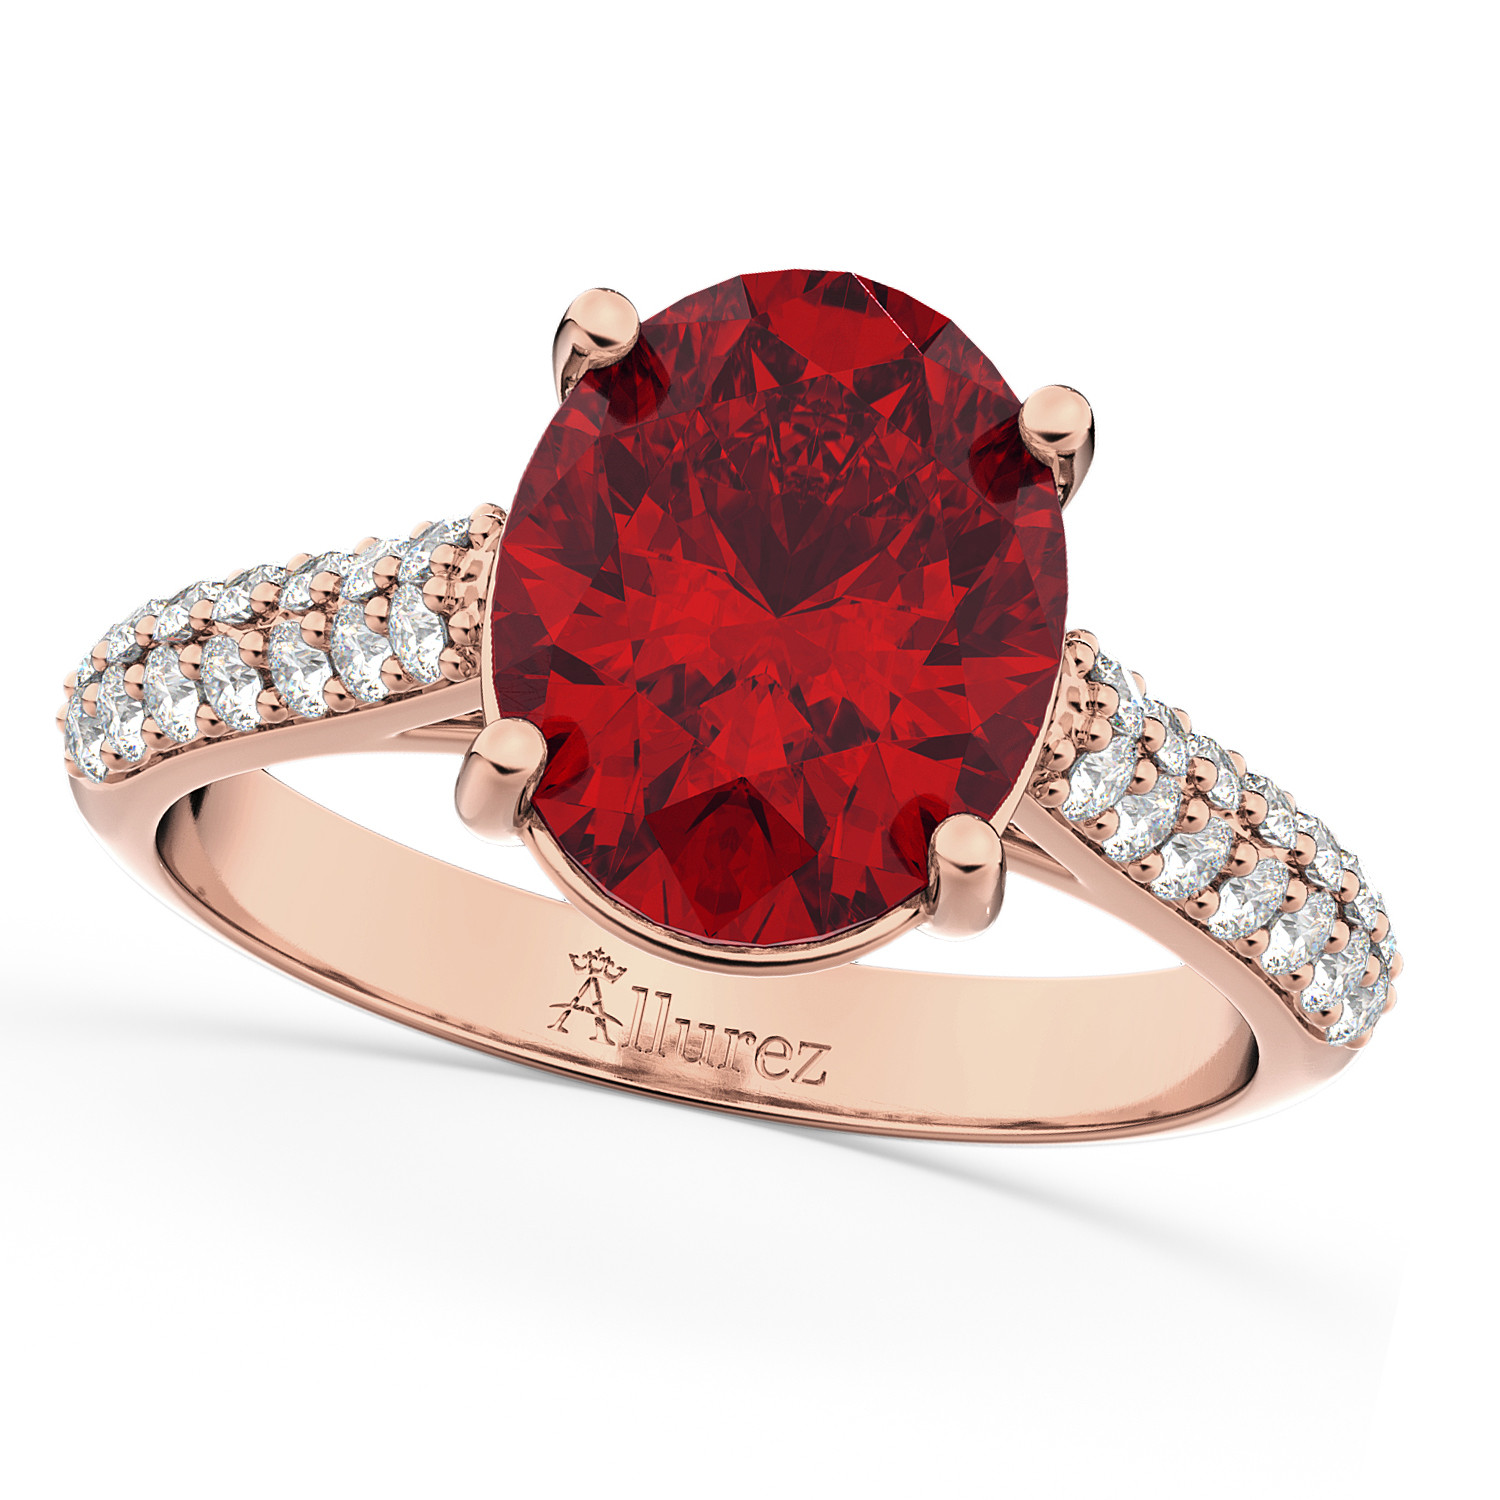 Ruby Diamond Engagement Ring
 Oval Ruby & Diamond Engagement Ring 14k Rose Gold 4 42ct